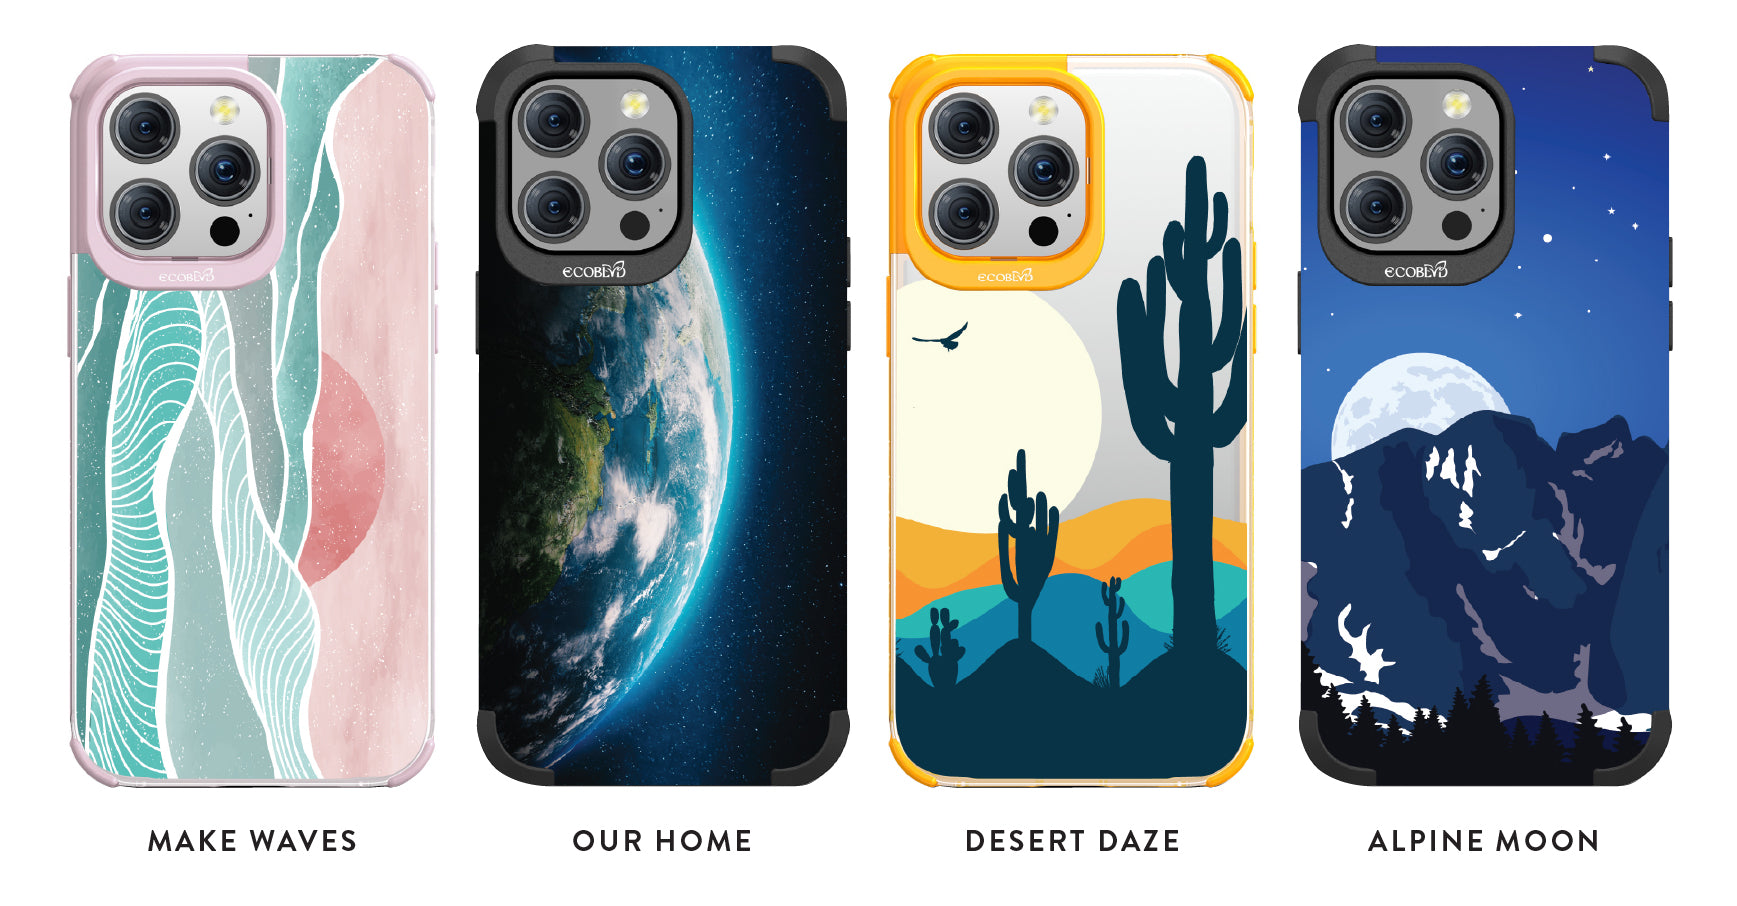 World Views - Natural Environments Celebrating Earth Day On Eco-Friendly Phone Cases